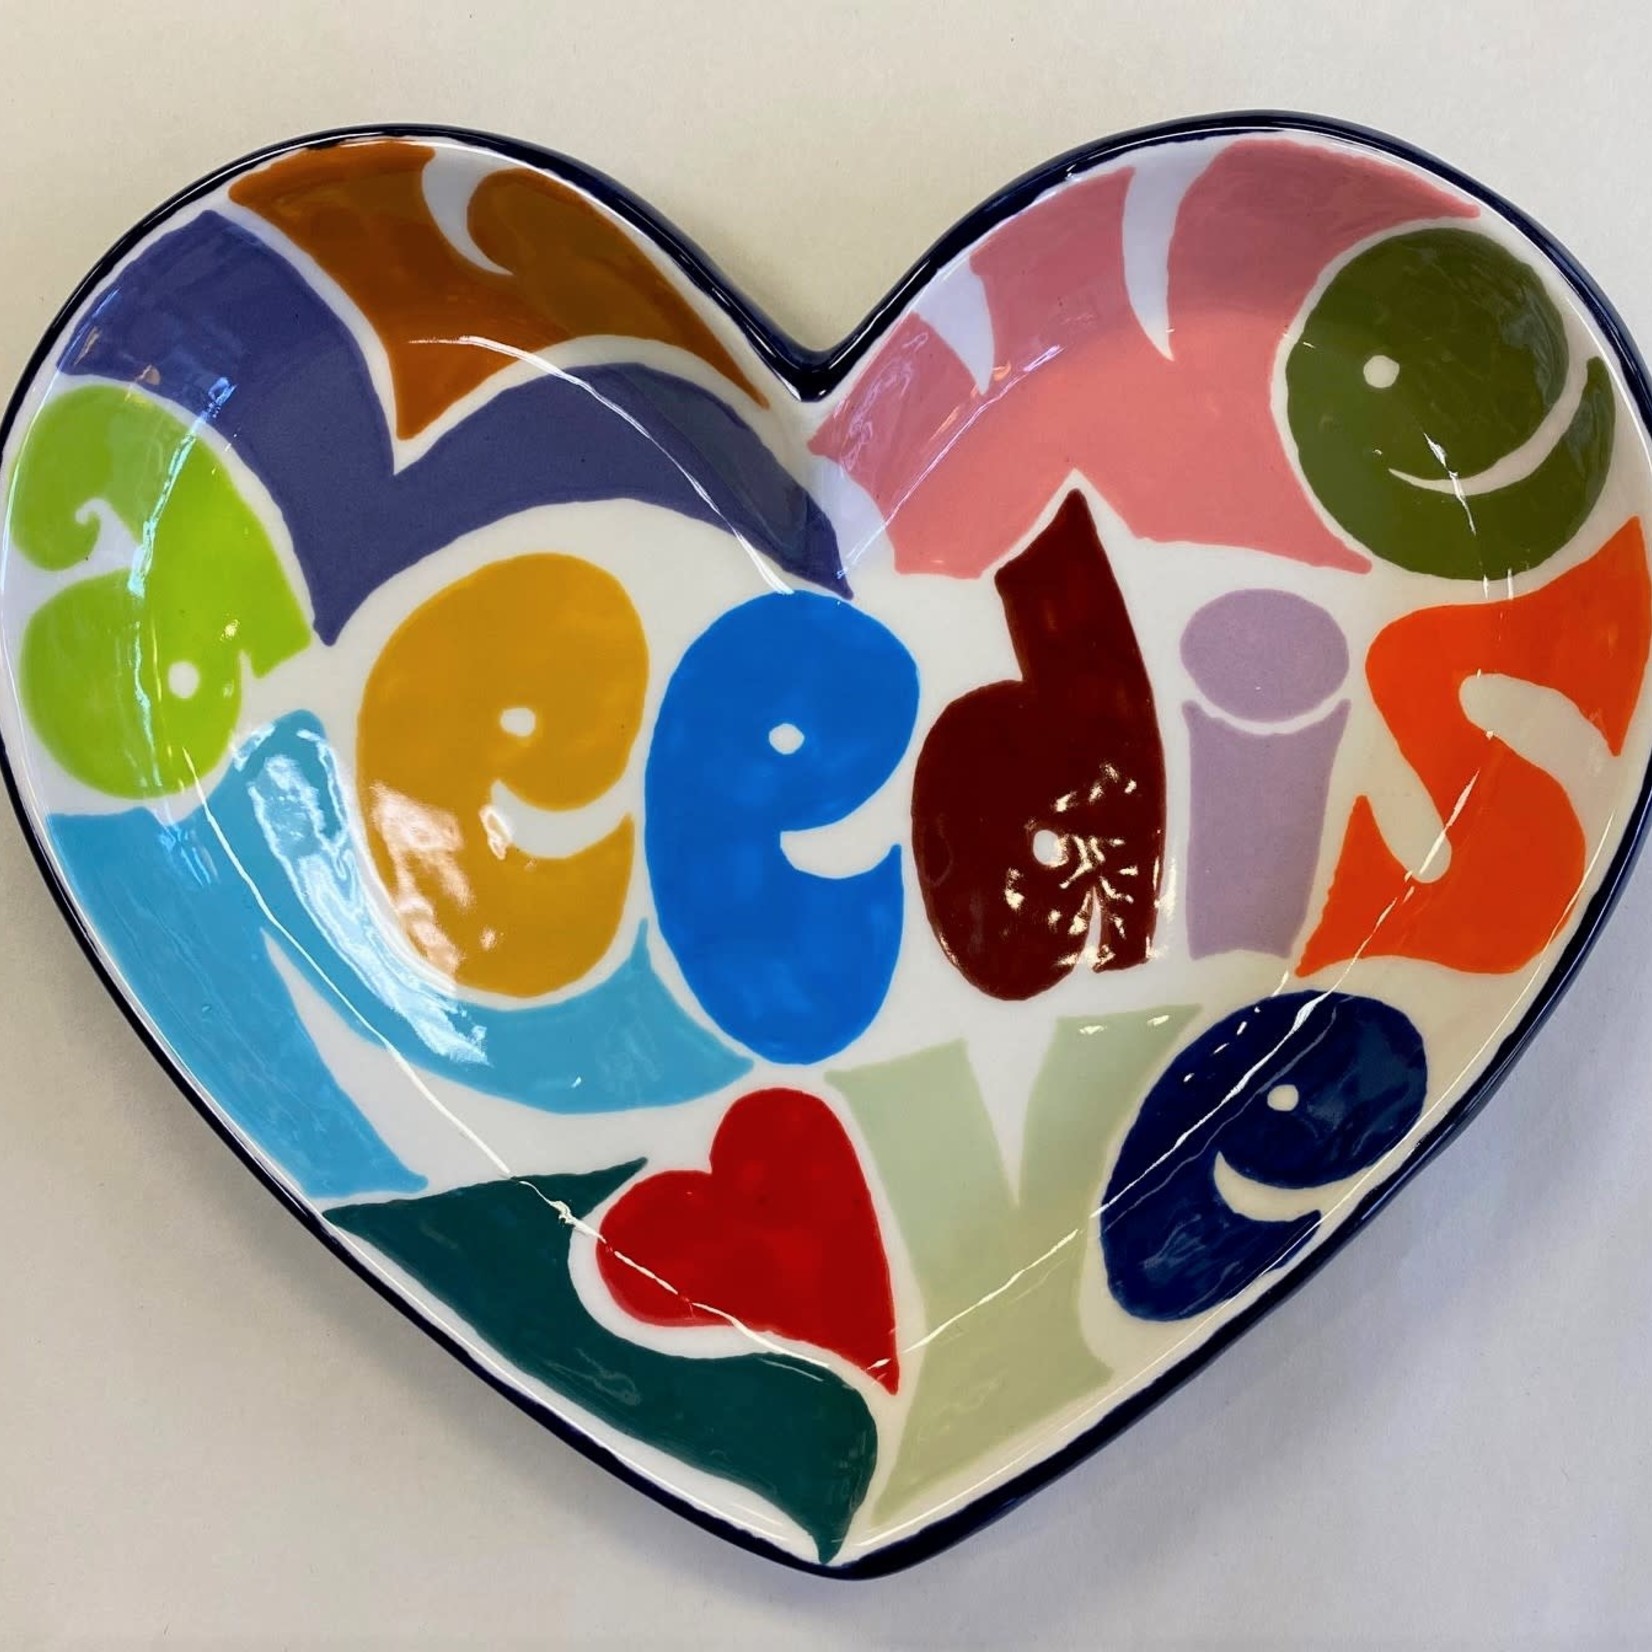 Heart Plate - Large (10.25" L x 9" W x 1.25"H)